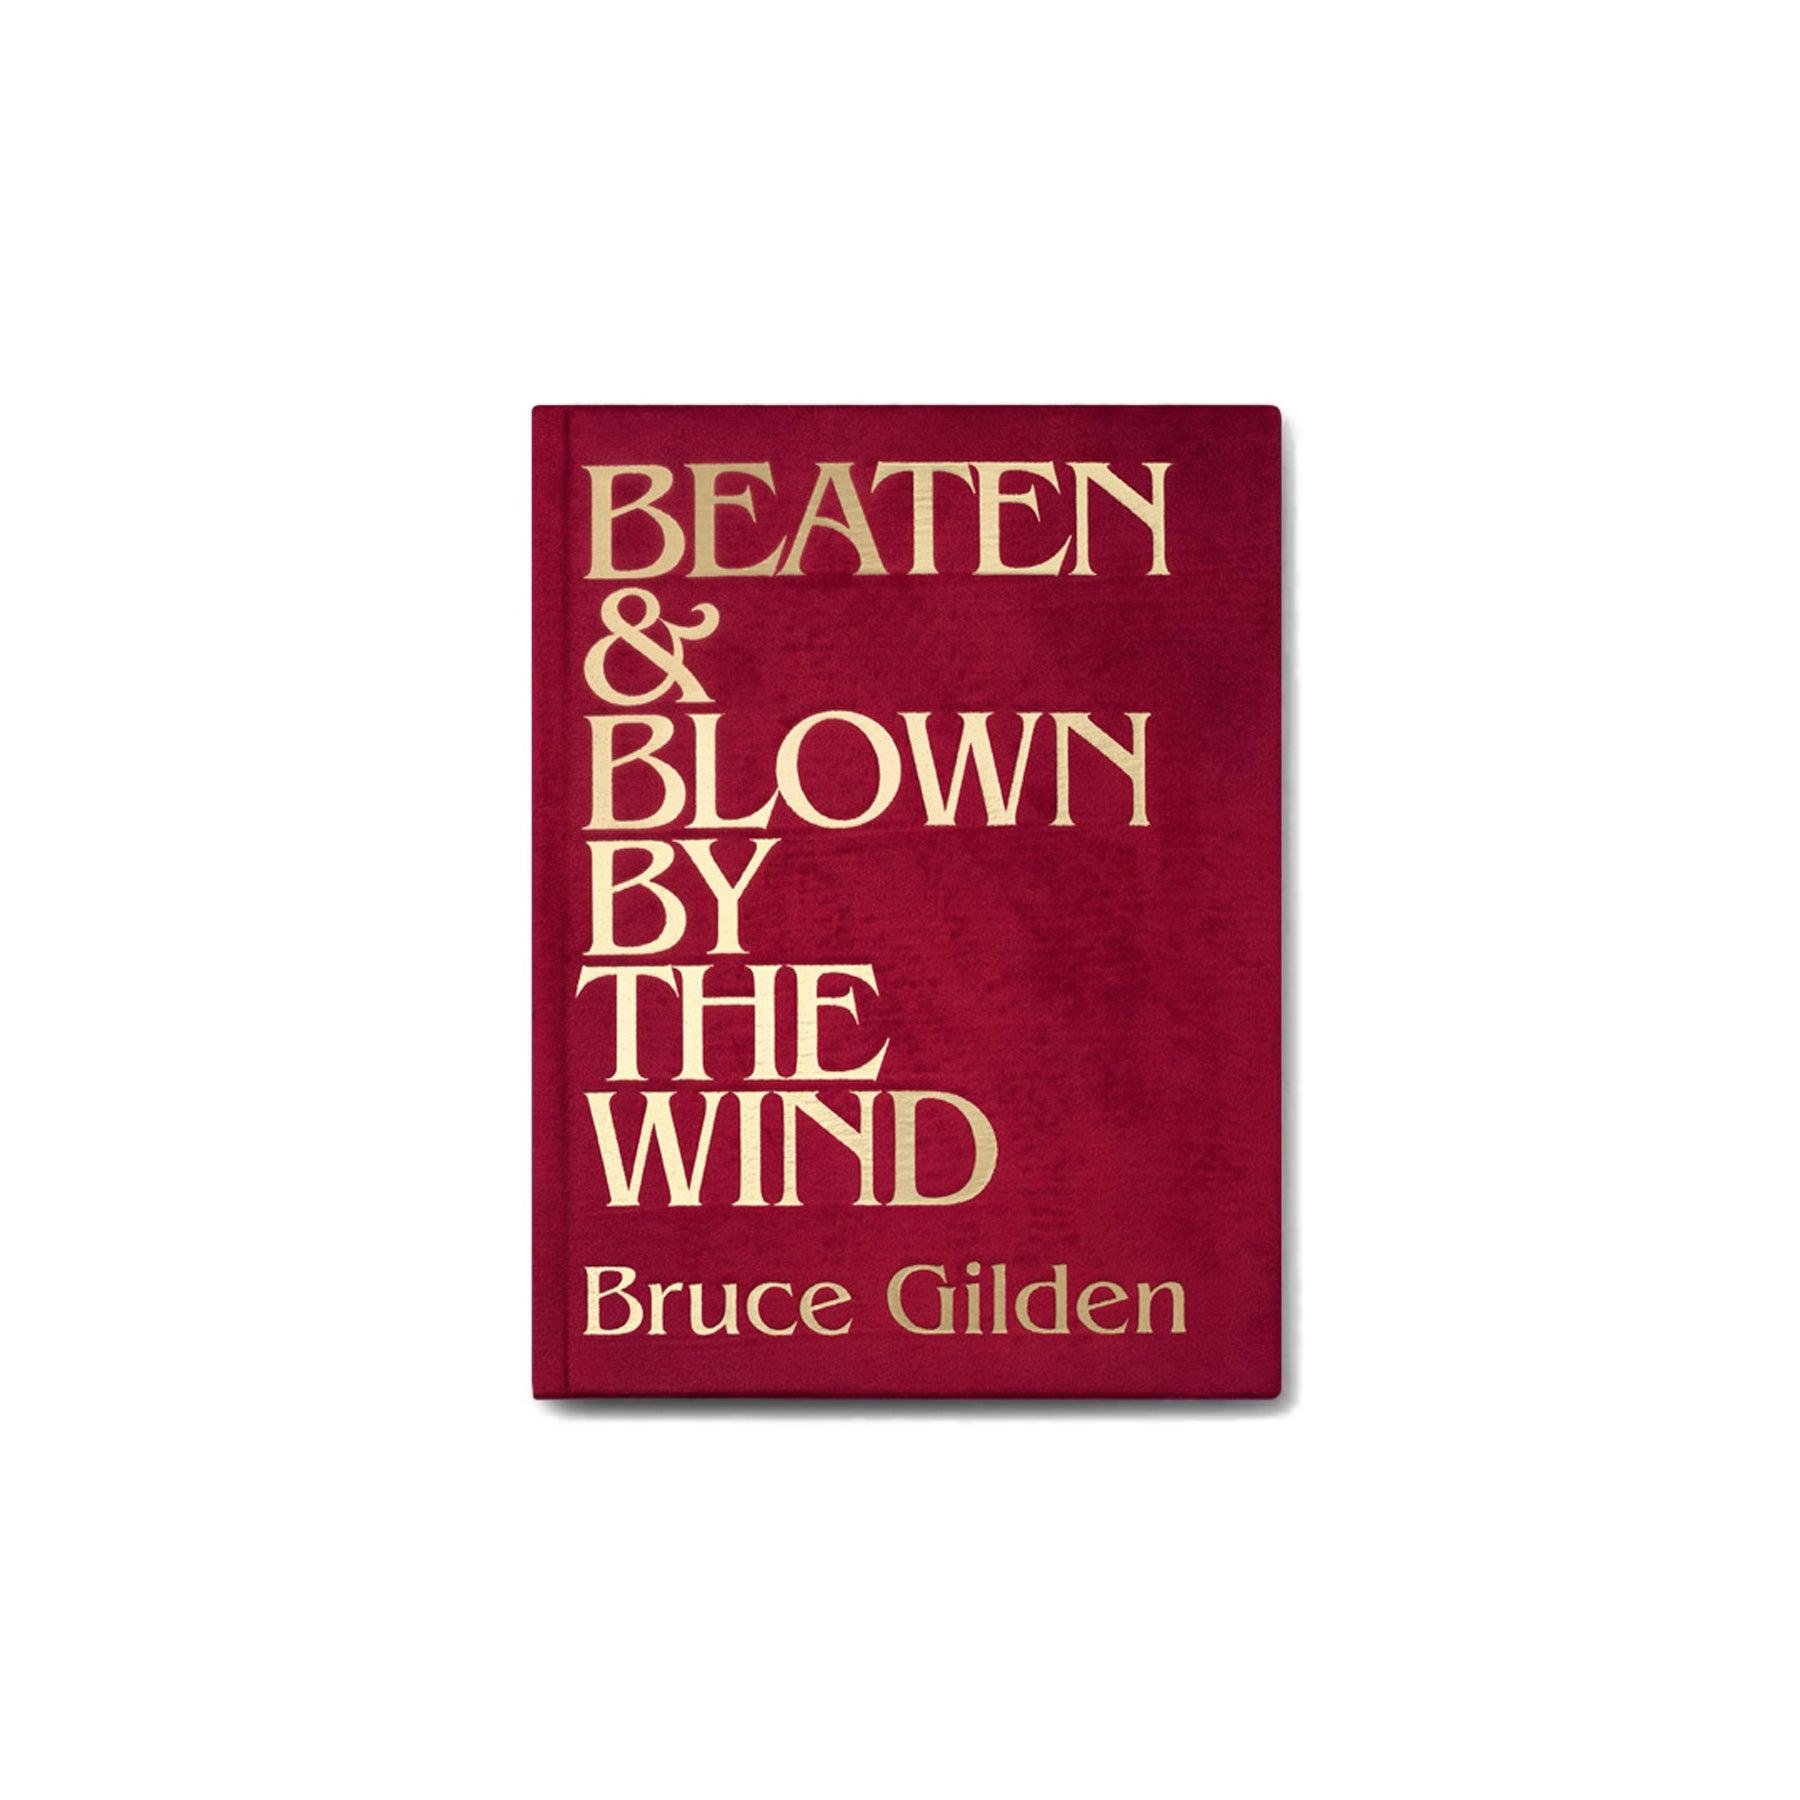 Idea Books - Beaten and Blown by the Wind by Bruce Gilden by IDEA BOOKS